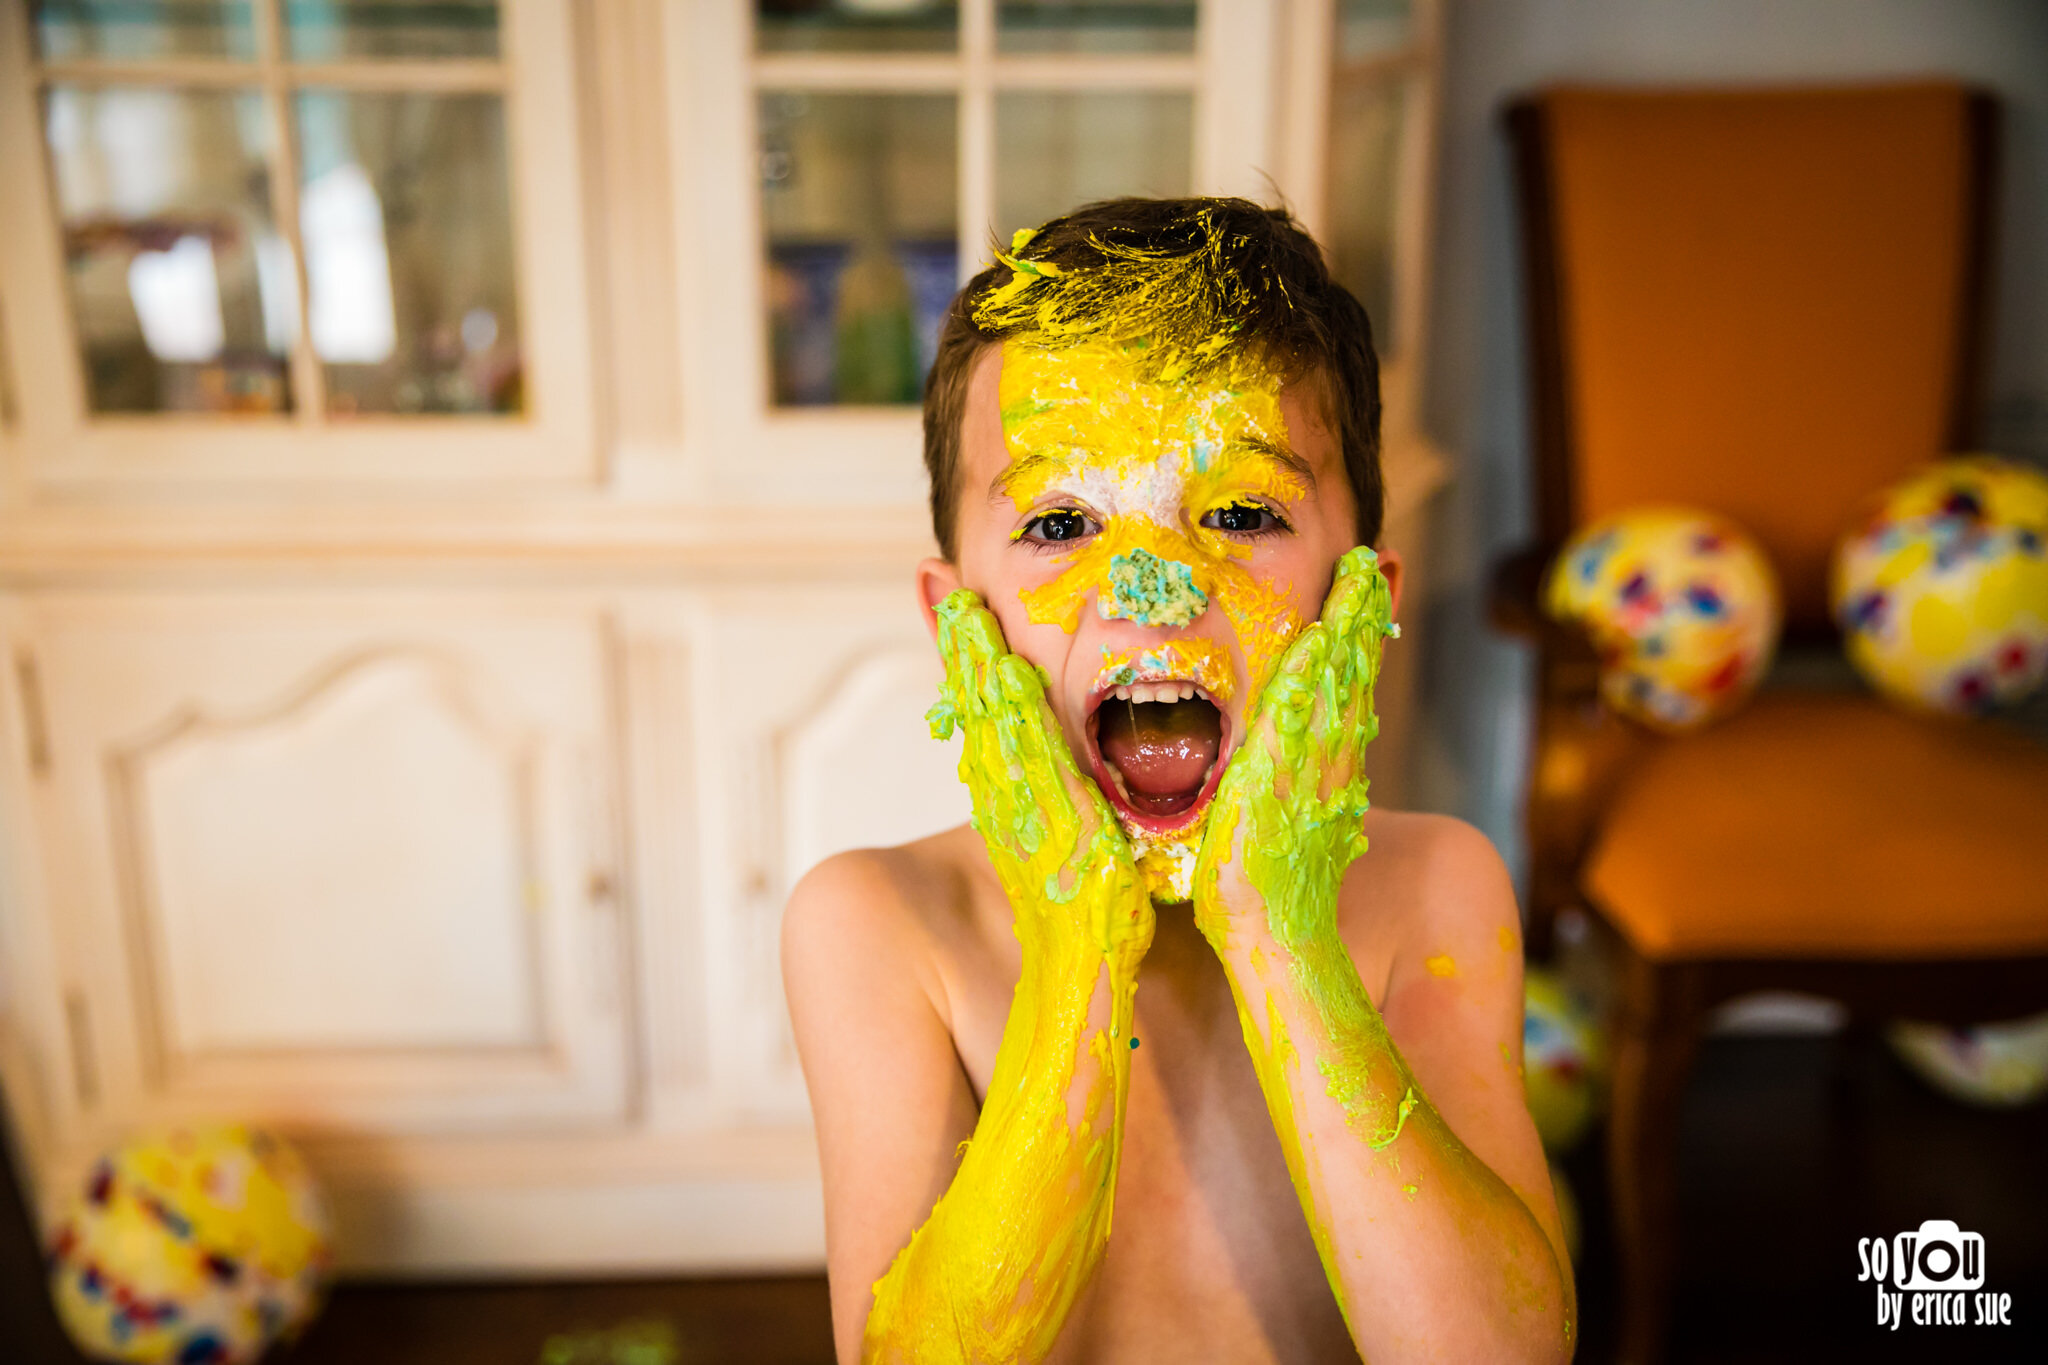 28-so-you-by-erica-sue-first-1st-birthday-cake-smash-in-home-lifestyle-photography-hollywood-fl-0743.JPG